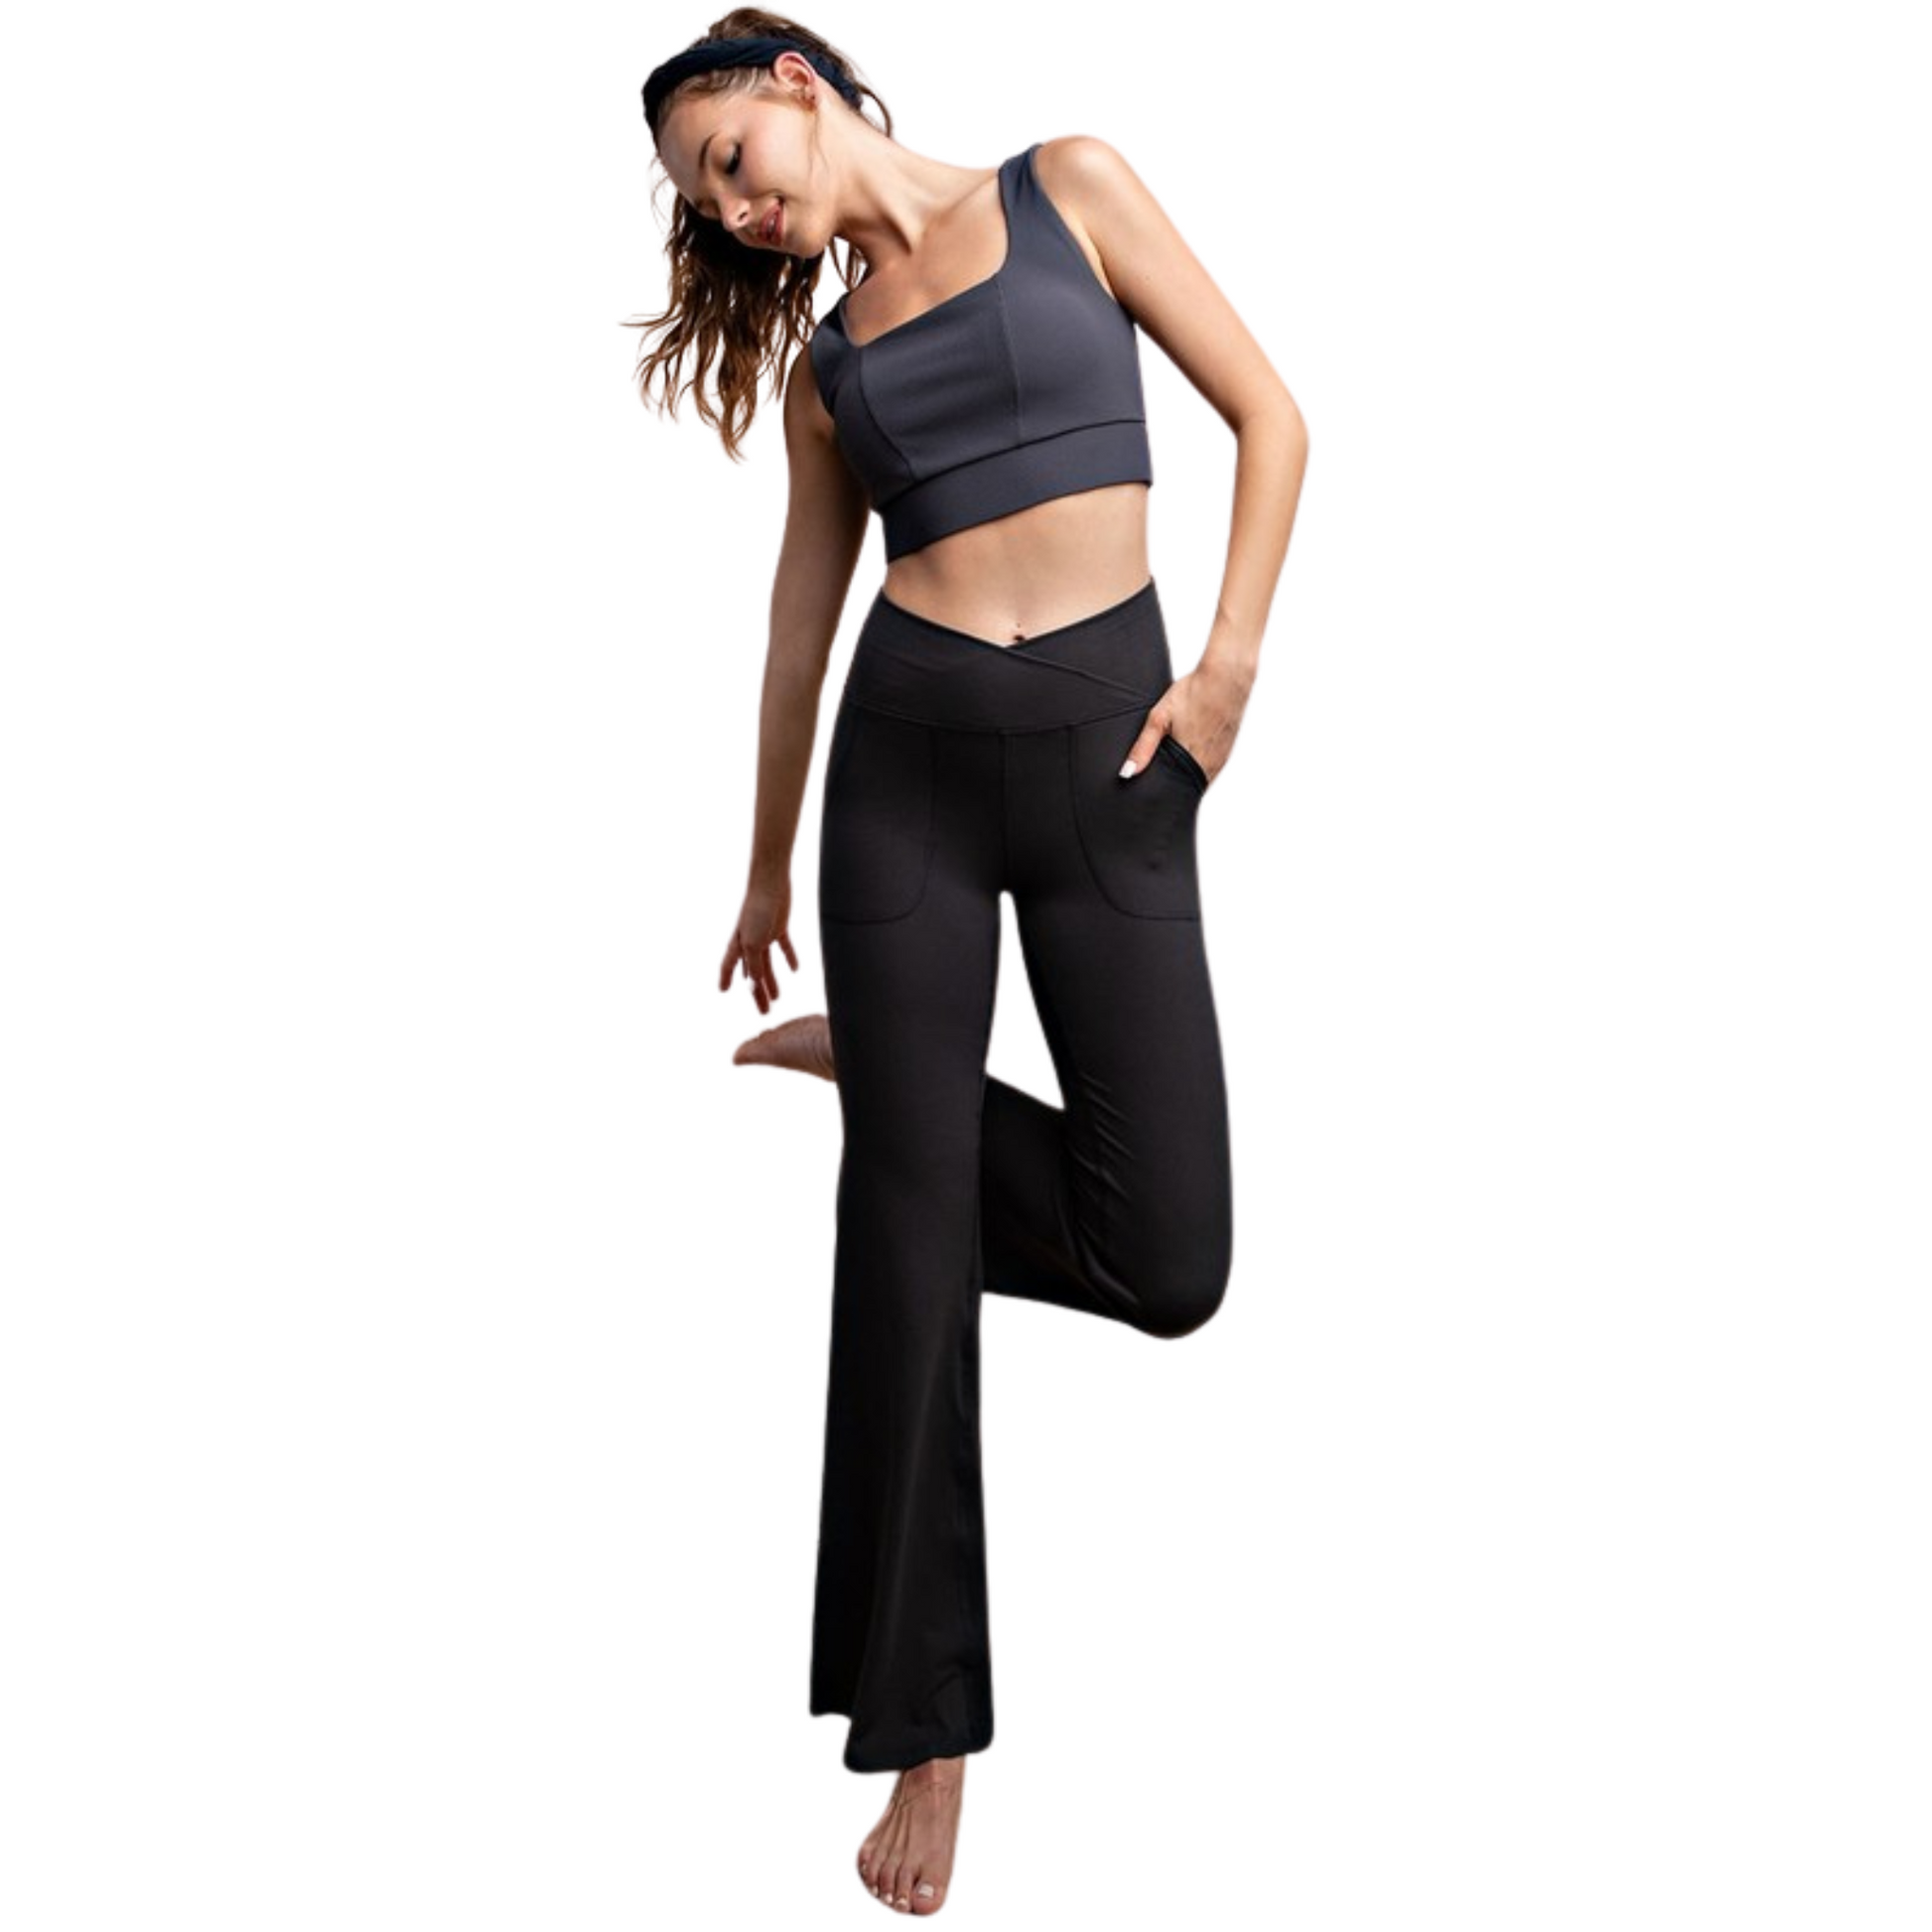 These black, full length butter yoga pants are designed for plus-size women and provide a buttery soft feel. The V waist and flared bell bottoms offer extra comfort and style, while the pockets provide convenience. Perfect for any yoga class or casual wear.